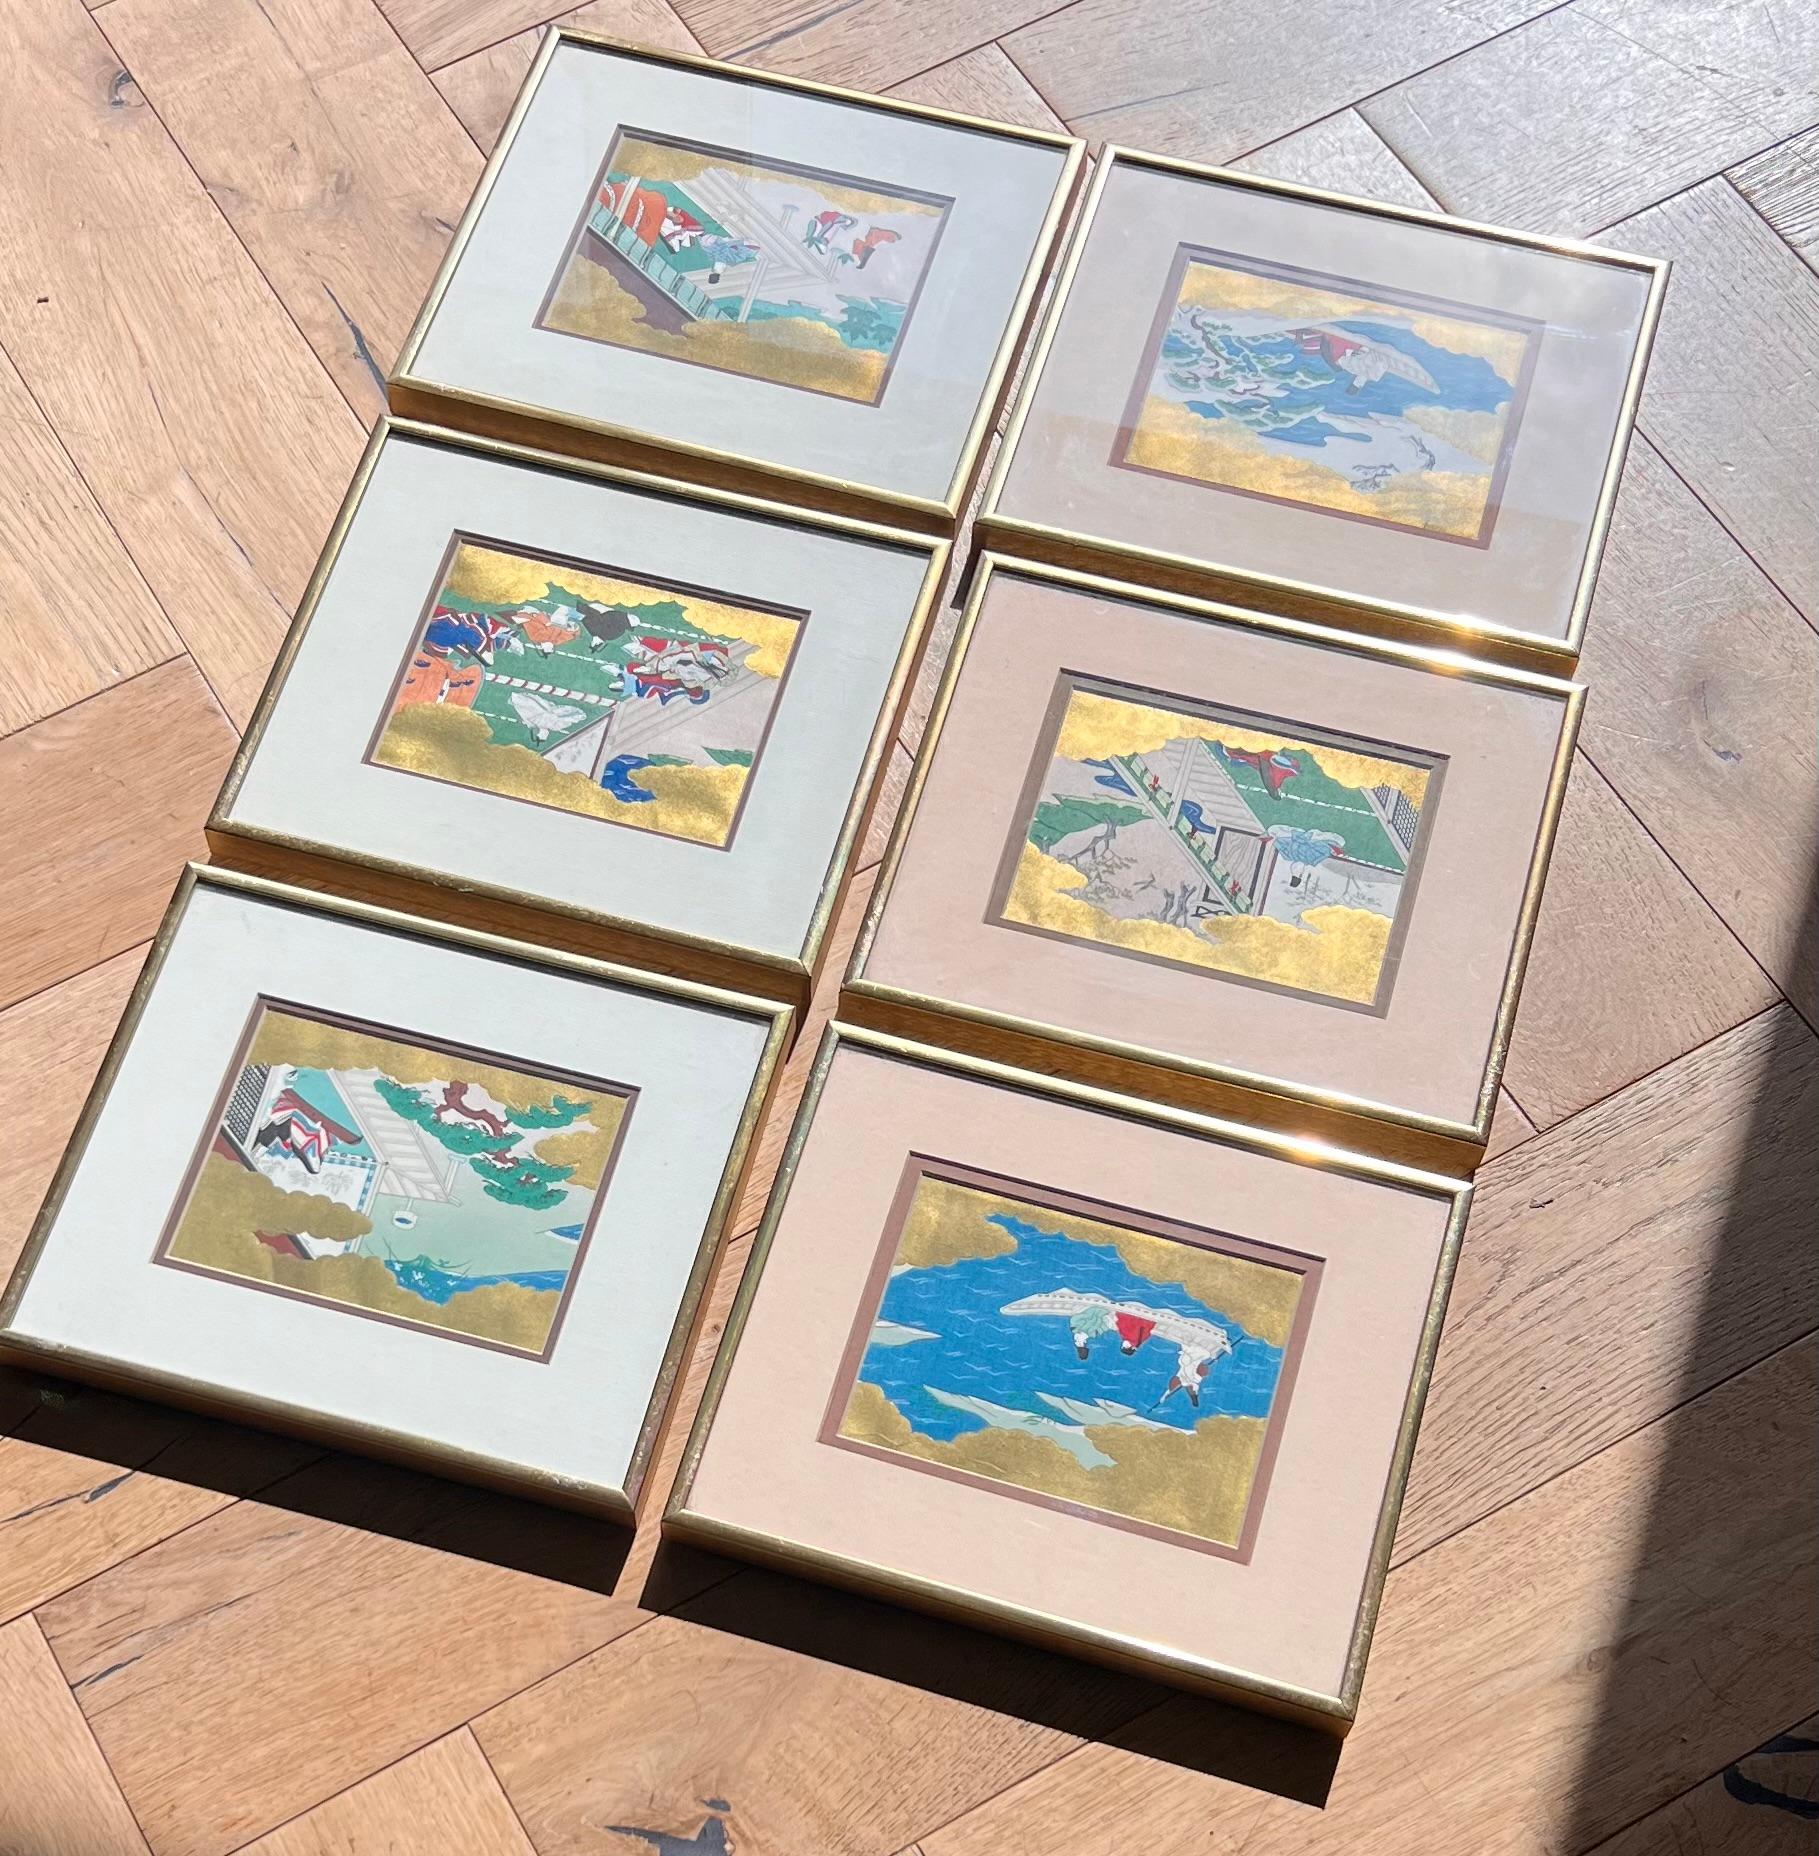 A set of six Japanese Genji story uchida woodblock prints, Kyoto early 20th century. Framed - probably late 20th century - in gold-tinted metal, matted in chocolate, ivory, and wheat, and behind glass. 
Uchida Bijutsu Shoshi 内田美術書肆, an art specialty